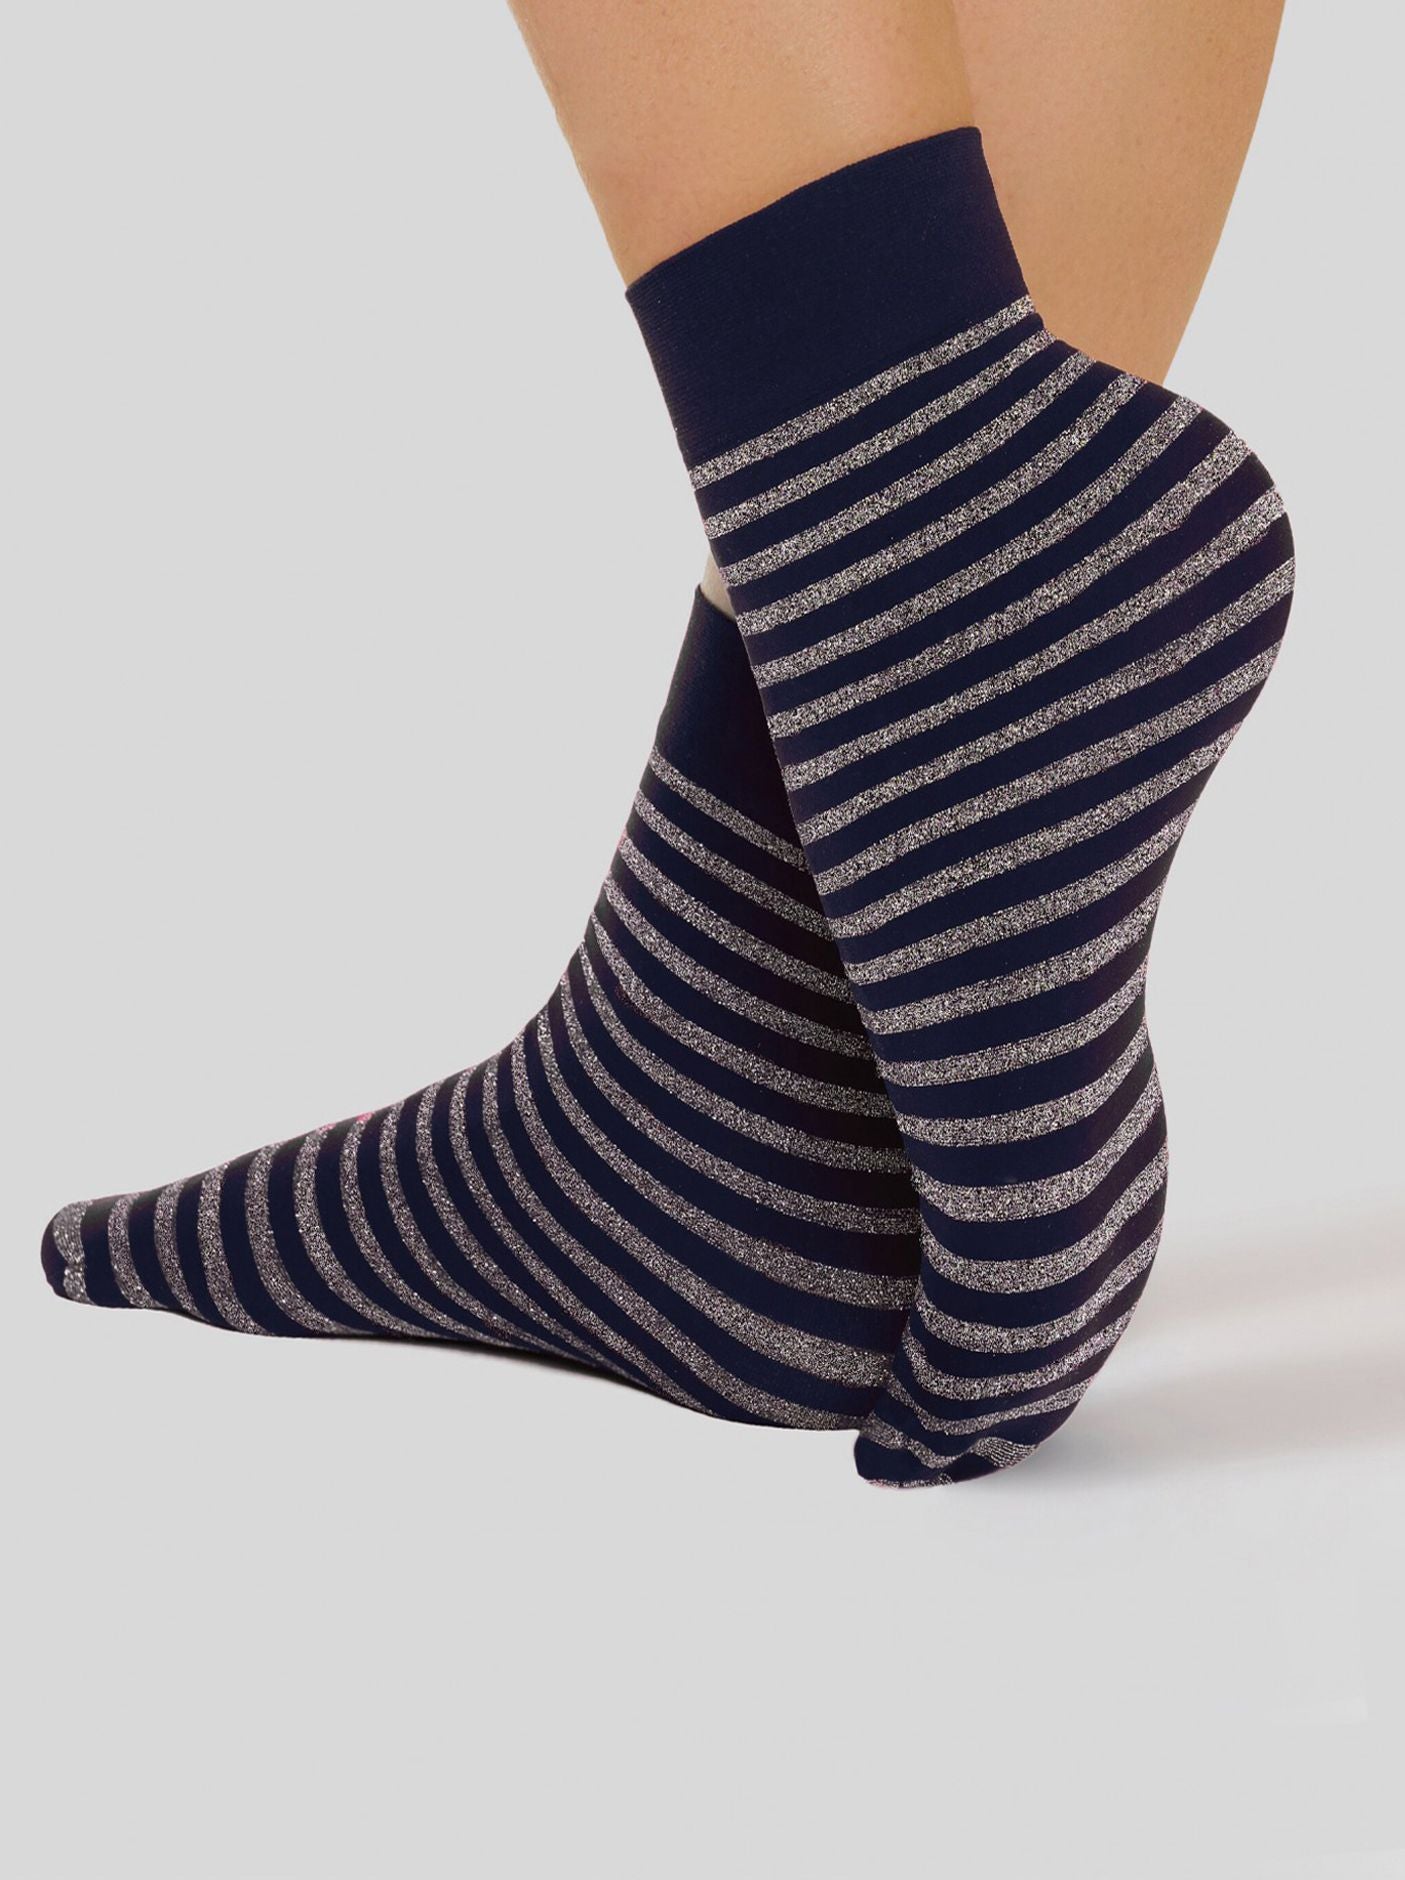 Conte Elegant Women's Glitter Socks with a shiny Lurex stripes, navy color